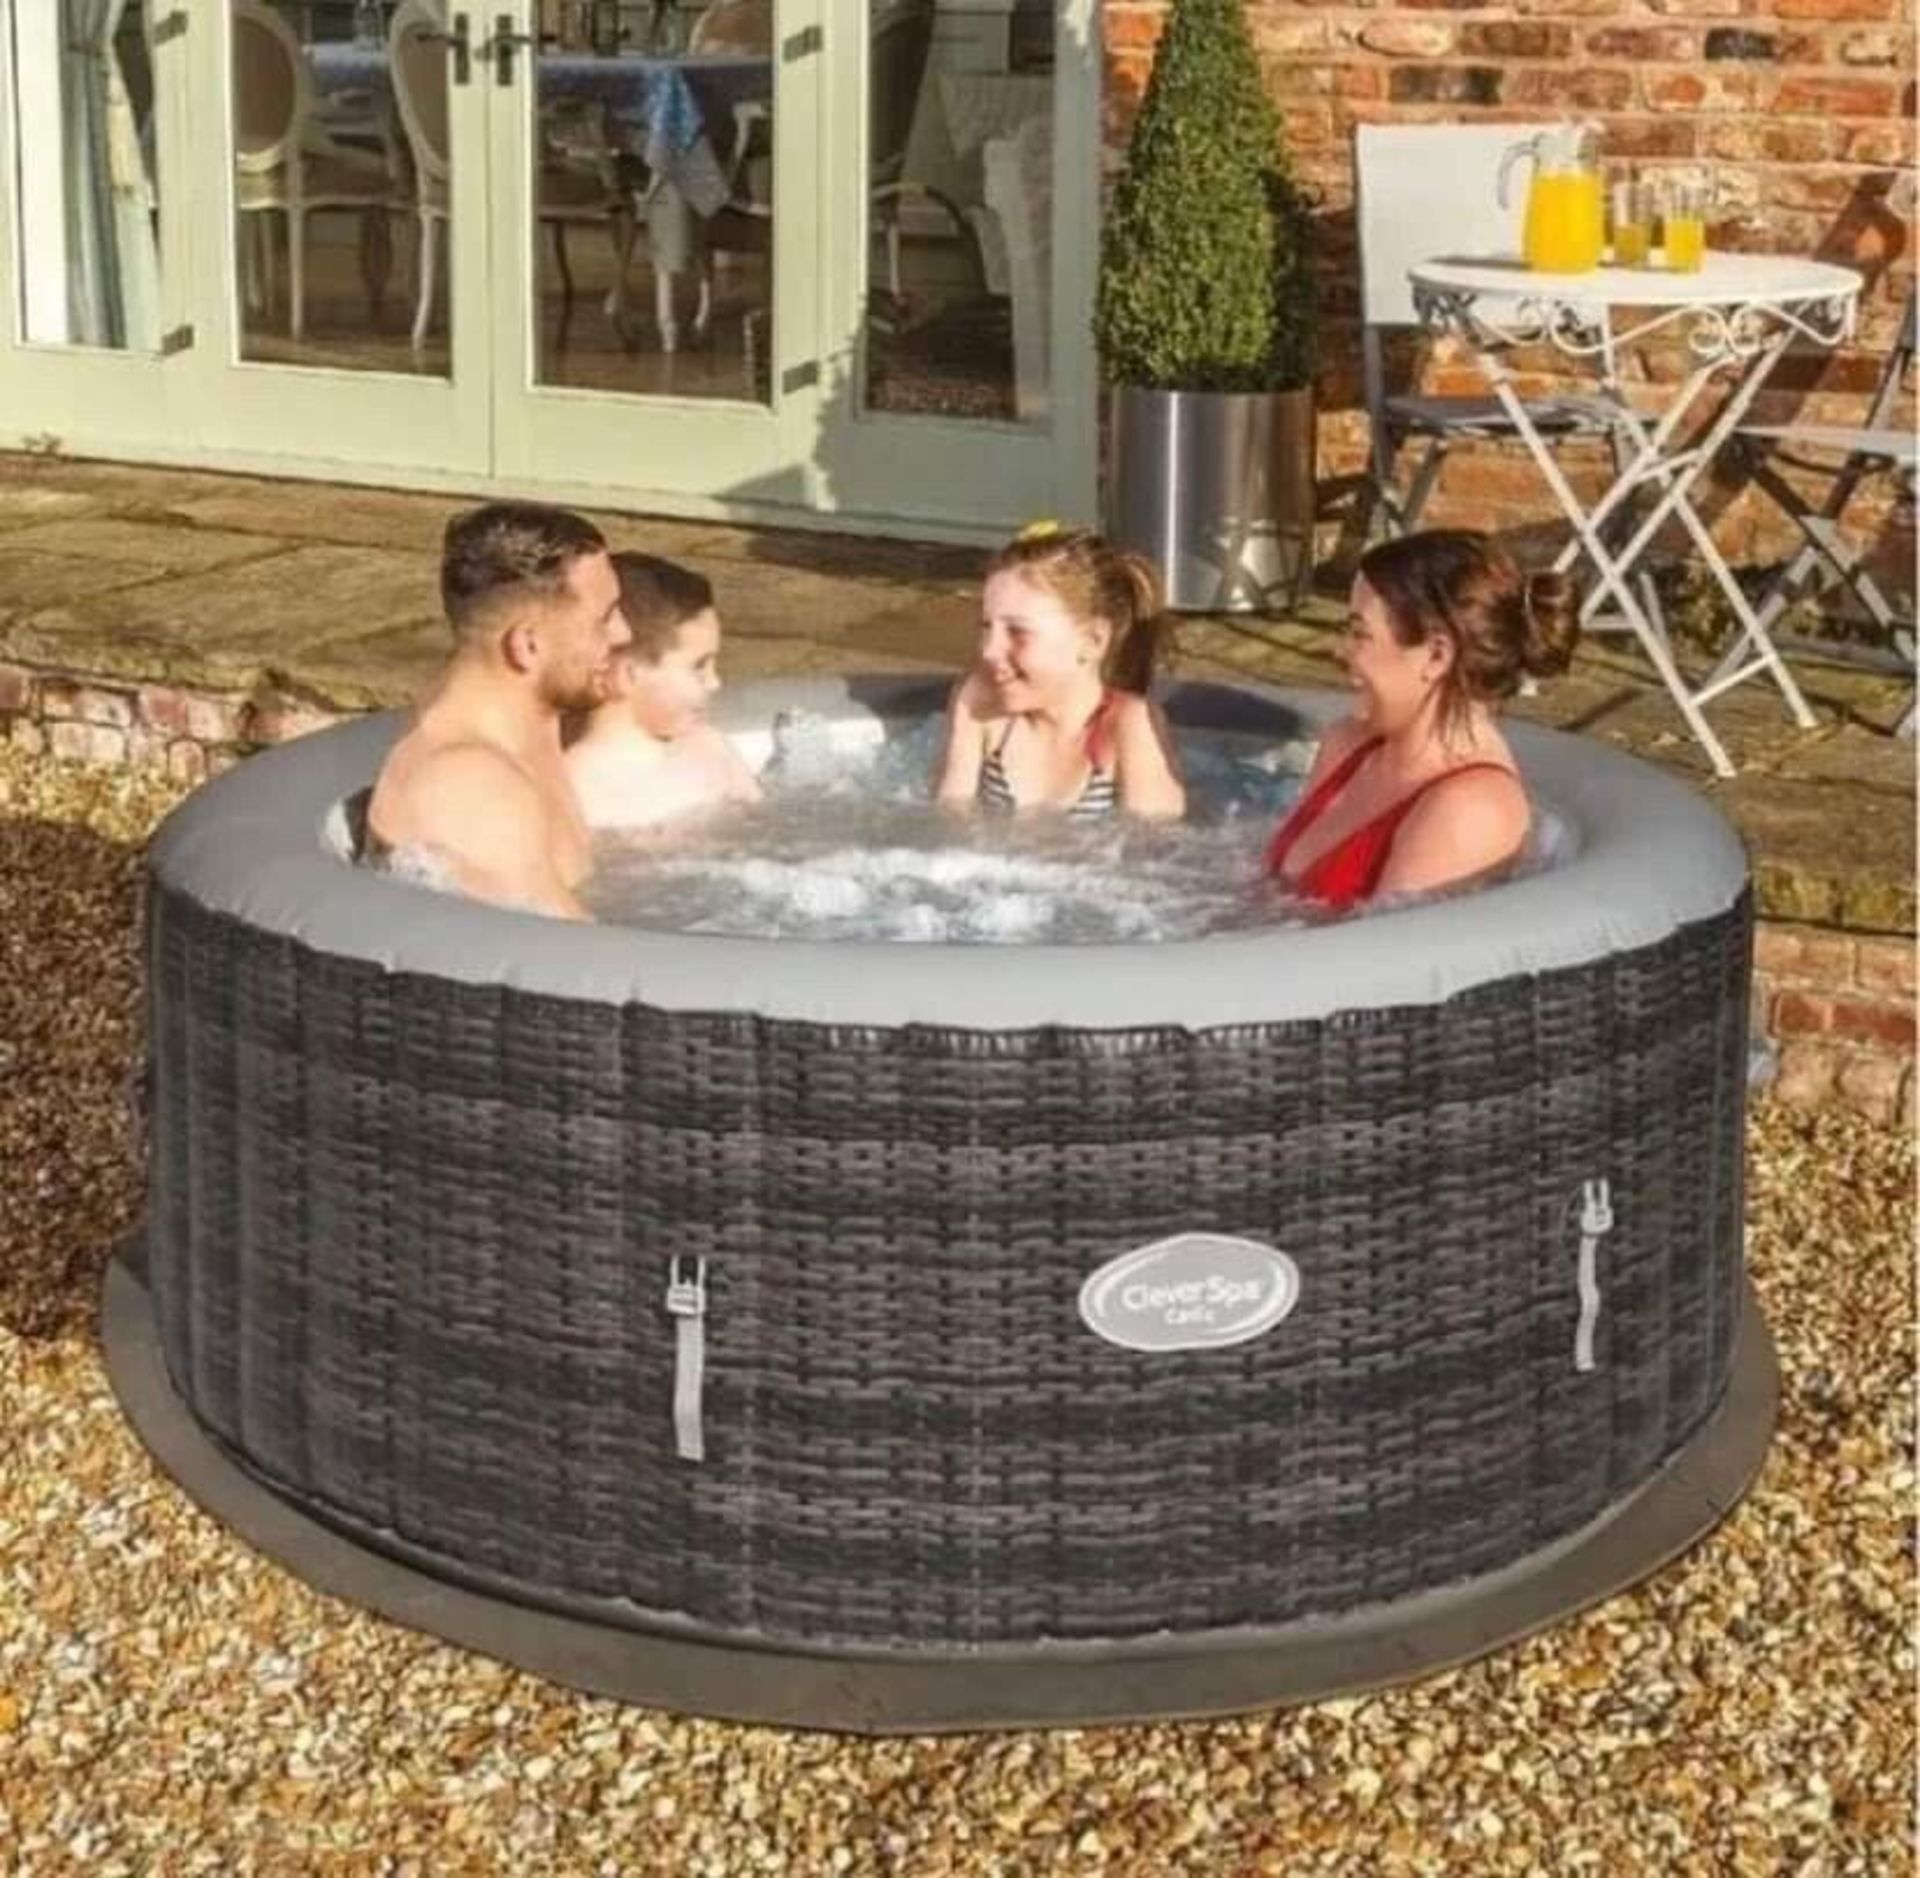 10 X NEW CATIZ 4 PERSON JACUZZI - BUILT IN PUMP AND HEATER - 110 AIR JETS - INFLATES IN 5 MINUTES